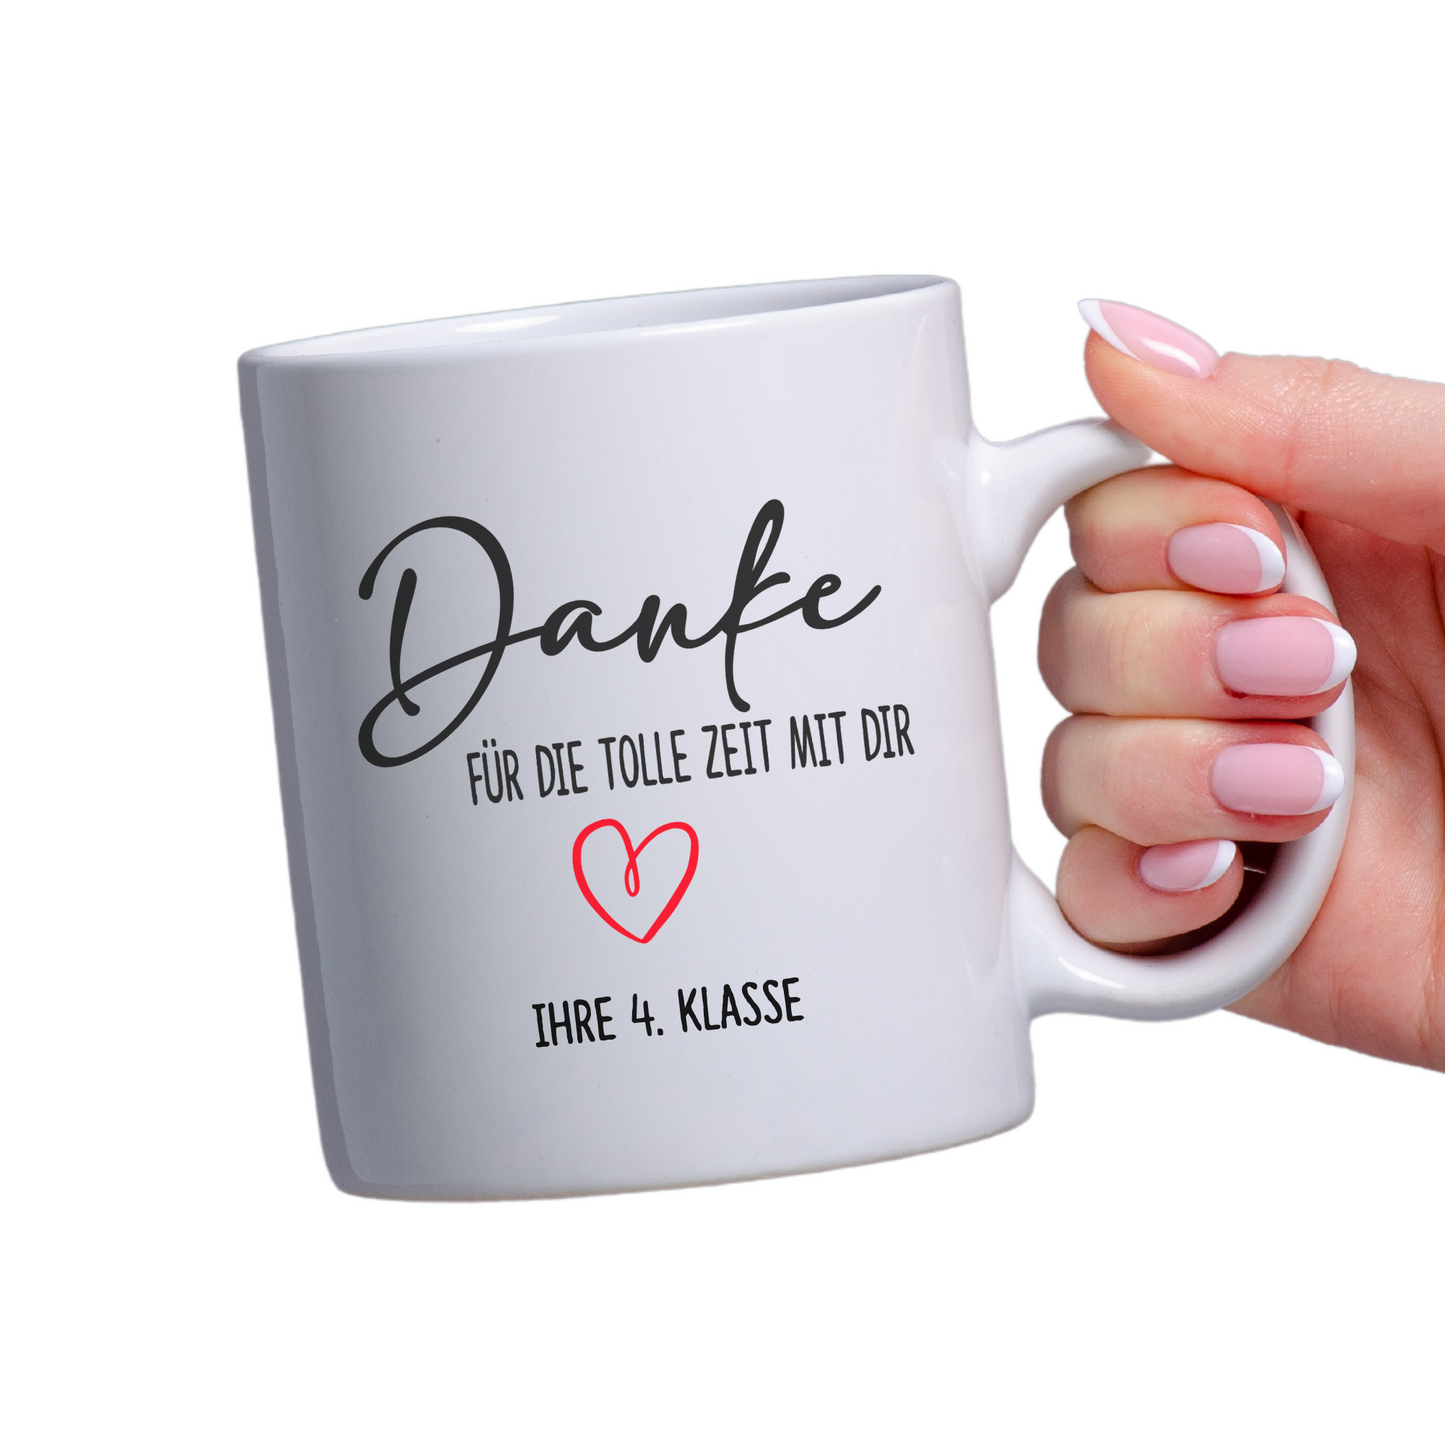 Cup "Thank you for everything" - gift educator childminder teacher - farewell kindergarten primary school - personalized